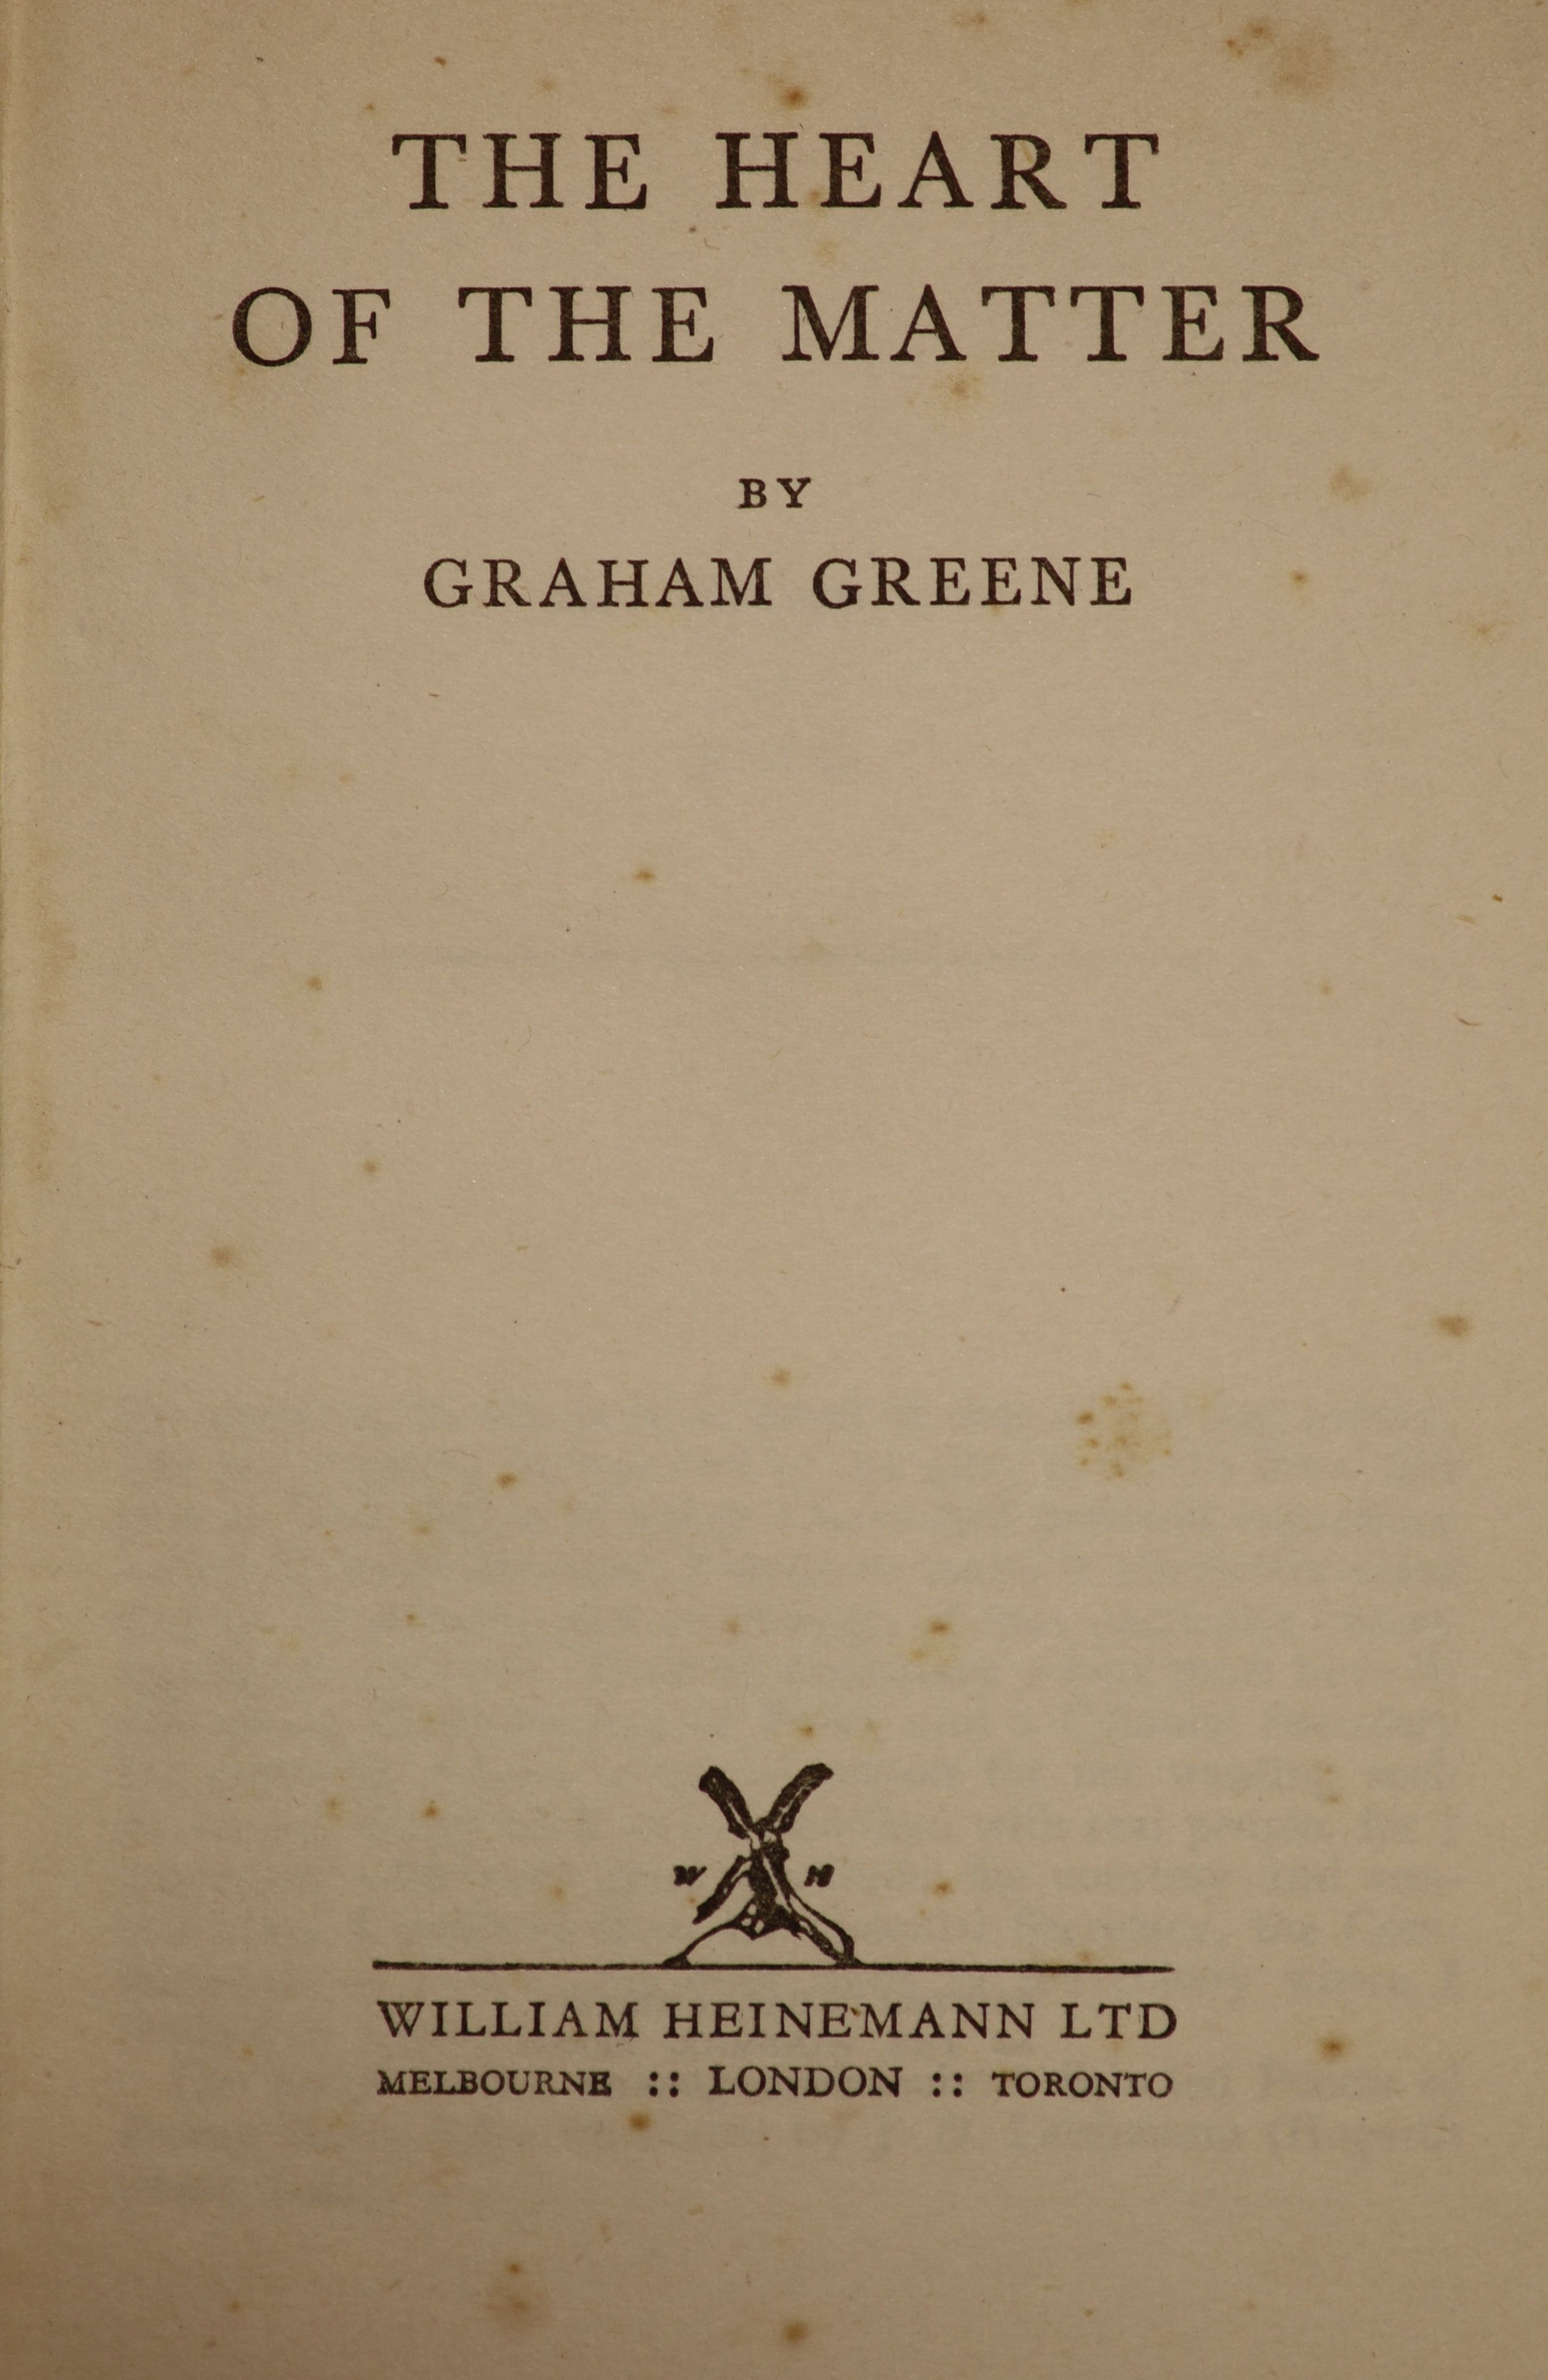 Greene, Graham - The Heart of the Matter, 1st edition, original blue cloth, in unclipped d/j with tears and loss, ink inscription to front fly leaf, text with occasional spotting,William Heinemann, London, 1948